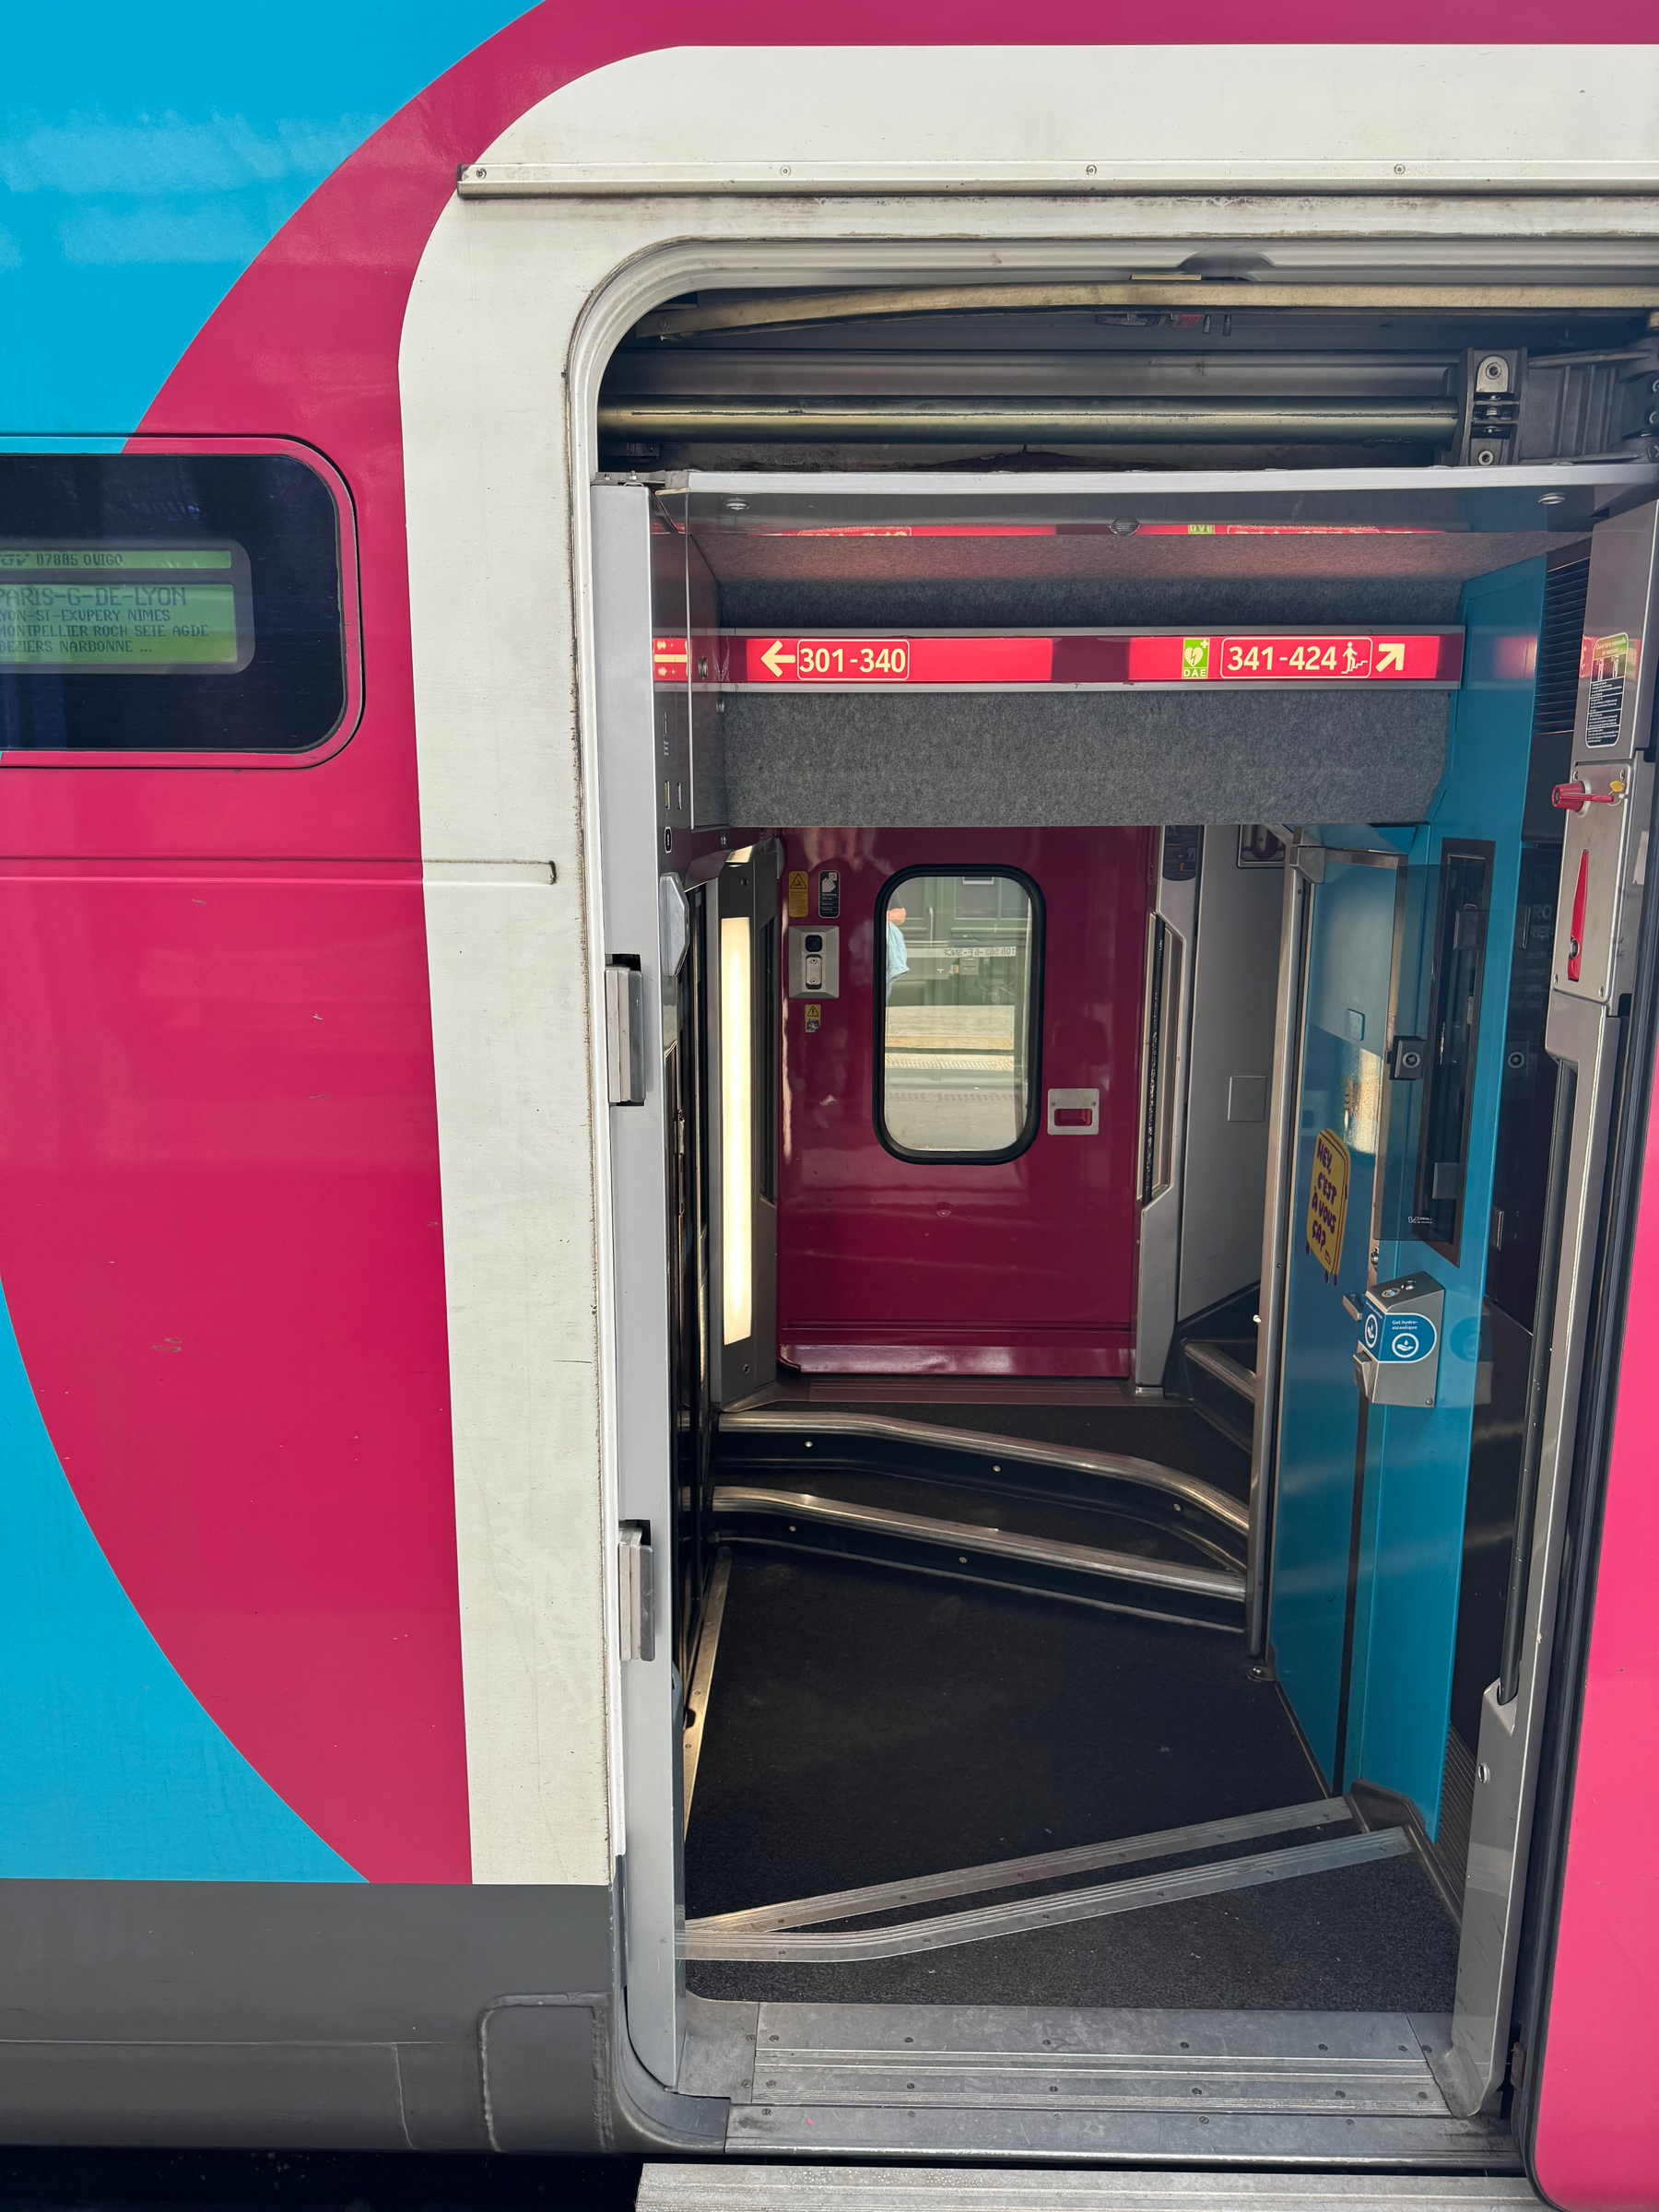 Open doorway of a train car with visible seat numbers and a colorful exterior design.